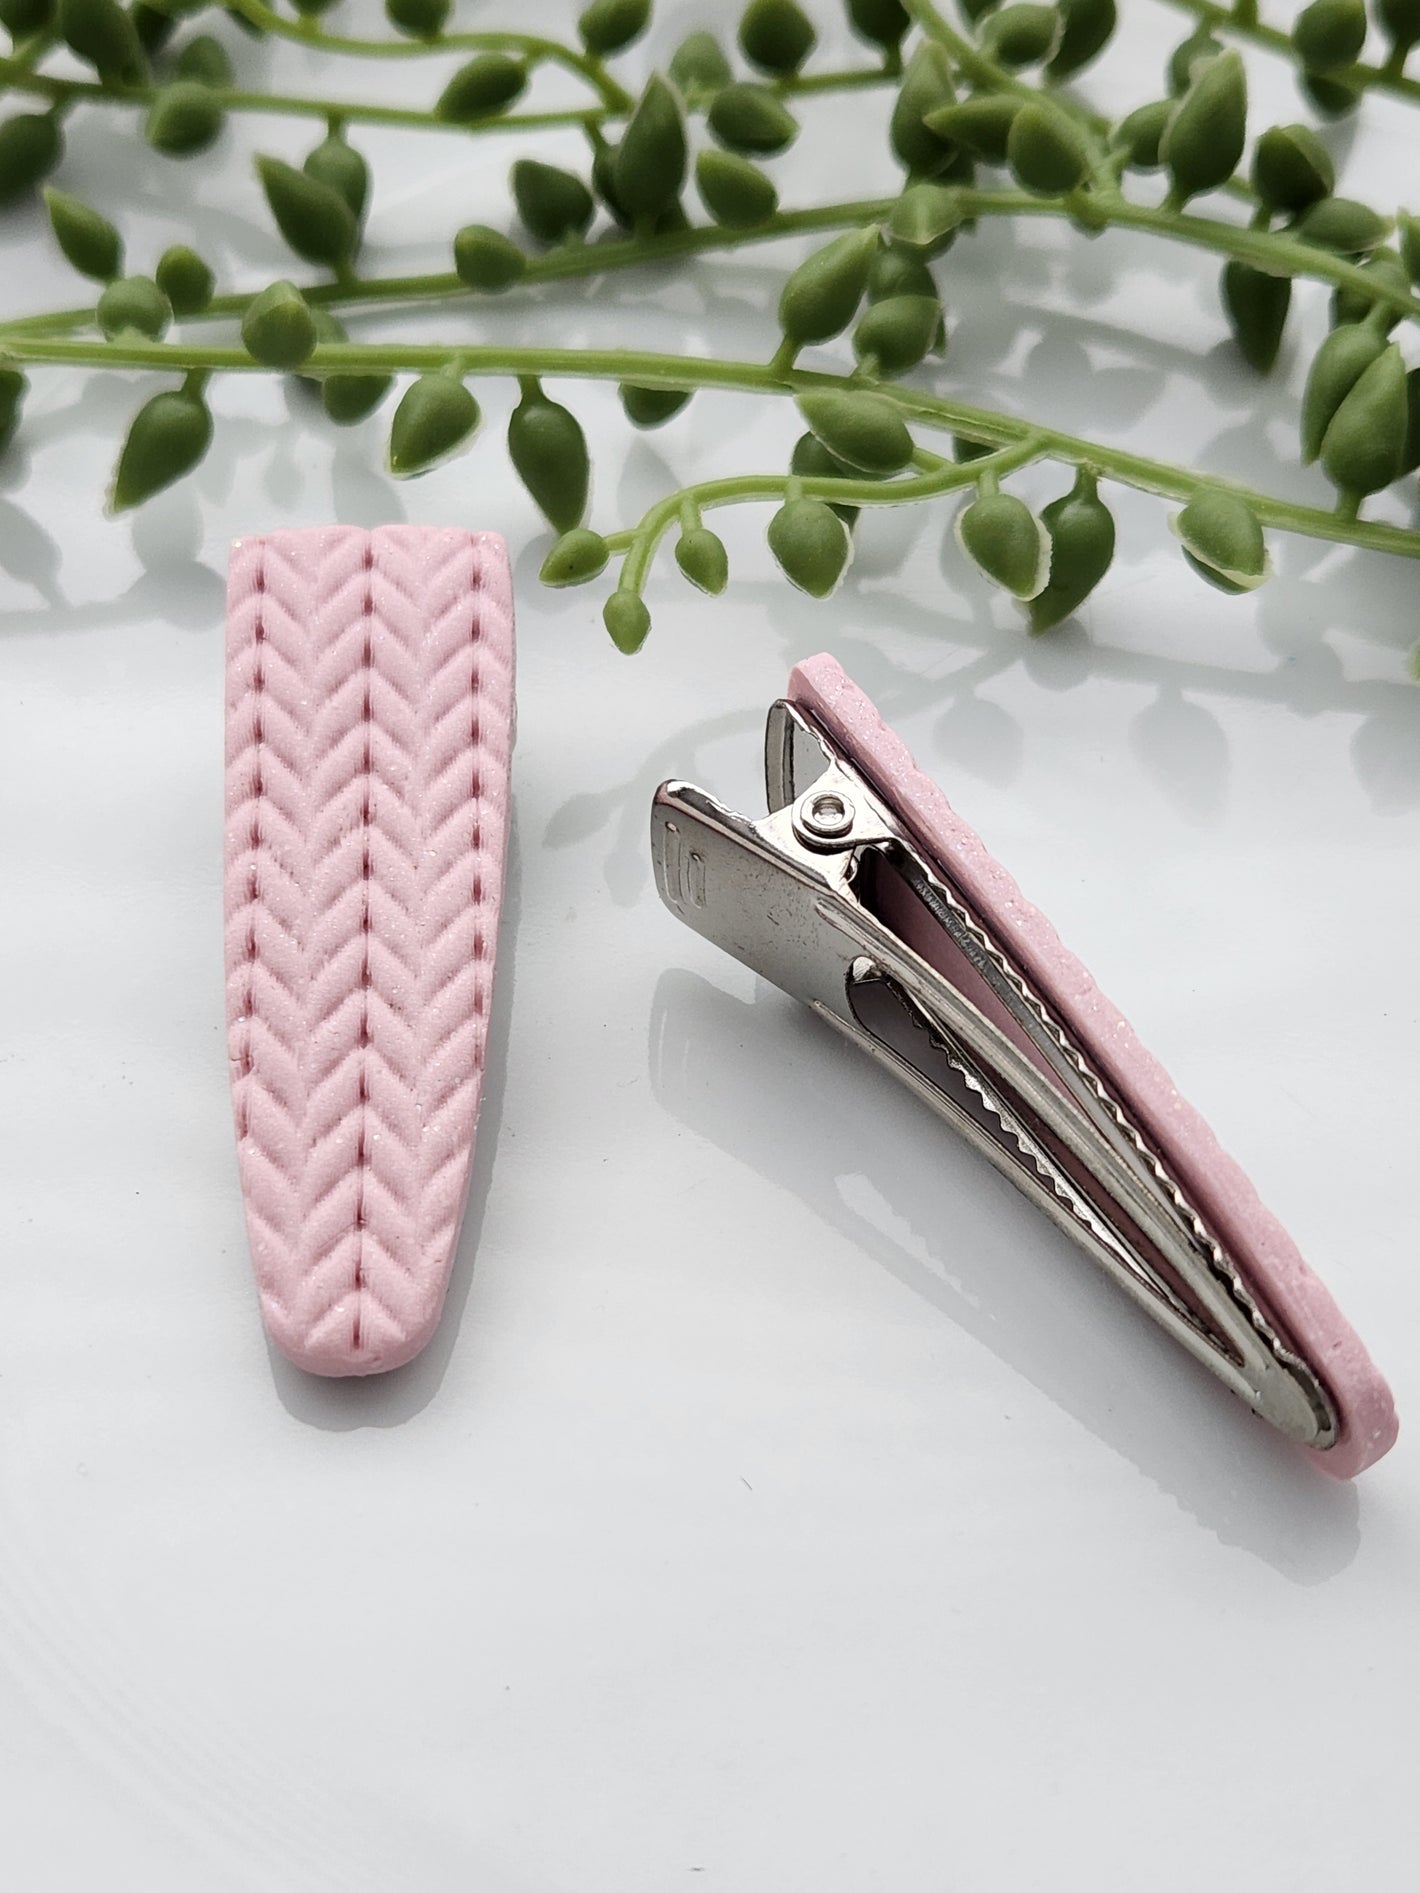 Handmade polymer clay hair clips! Super lightweight clips that bring a pop to any outfit! This beautiful clip is handmade with polymer clay in a blush pink color. It is matte and textured in a knit woven fabric look. Approximately 2.5" long.